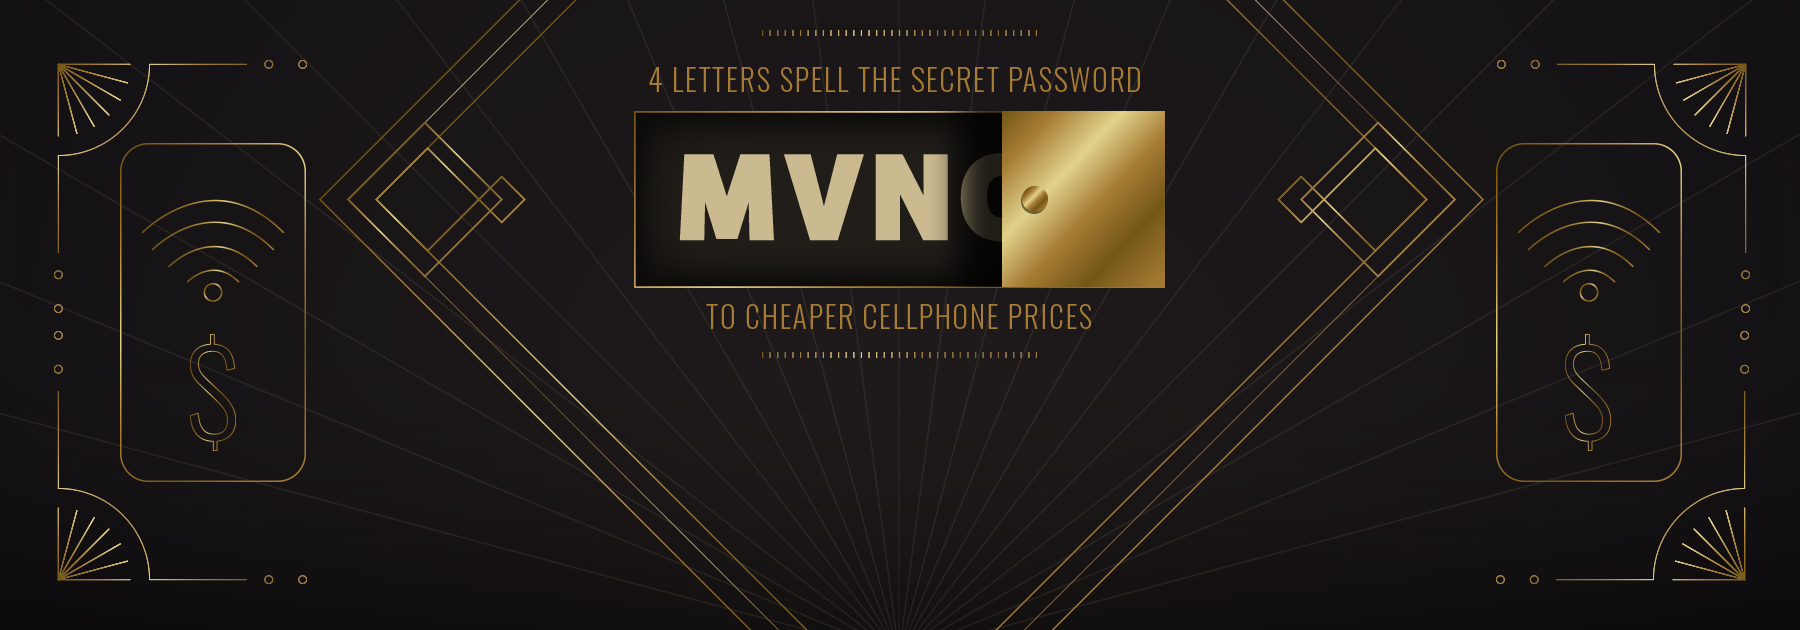 4 letters spell the secret password to cheaper cellphone prices: MVNO